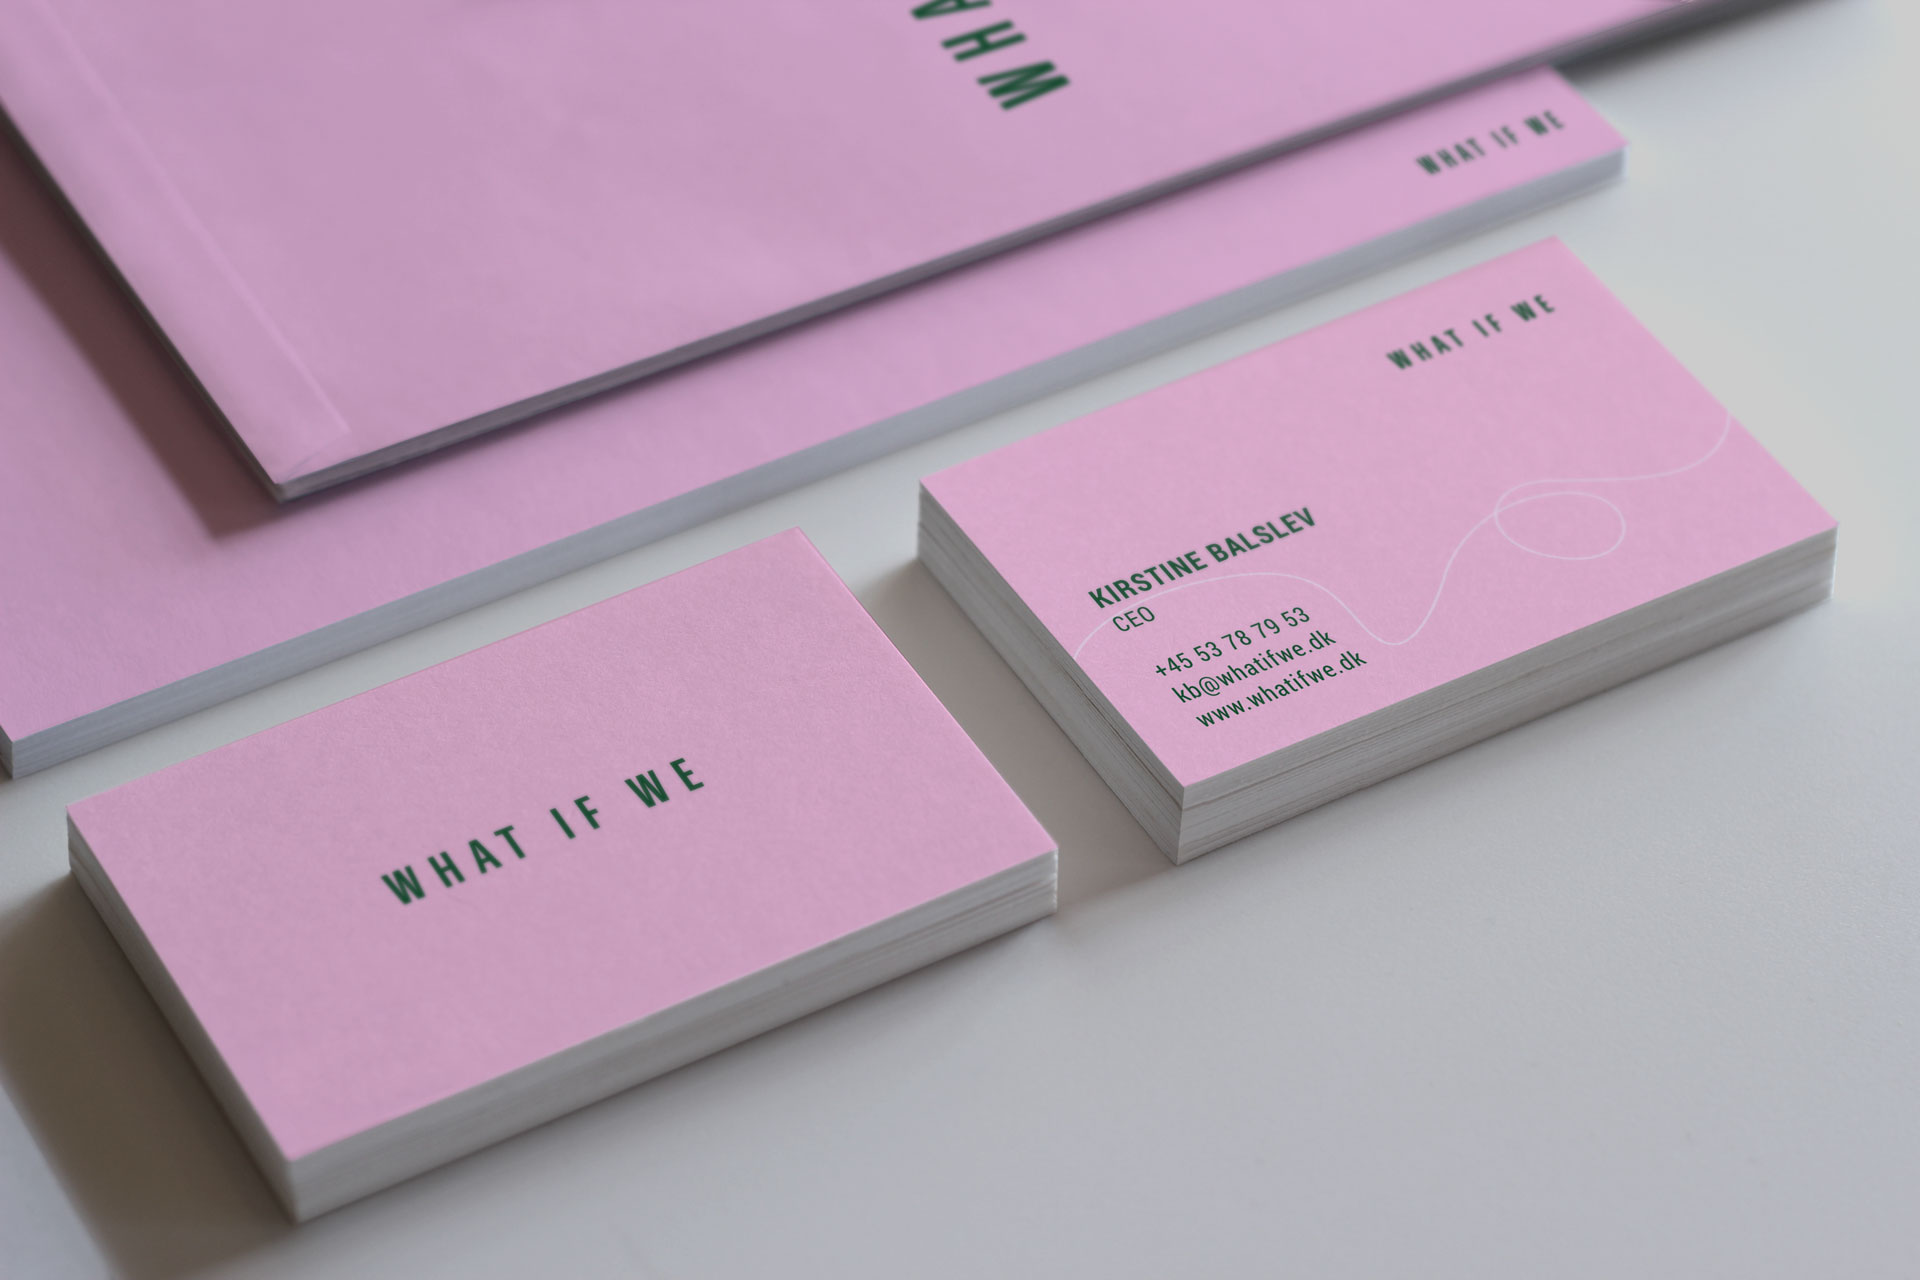 What-if-we-stationery-1-1